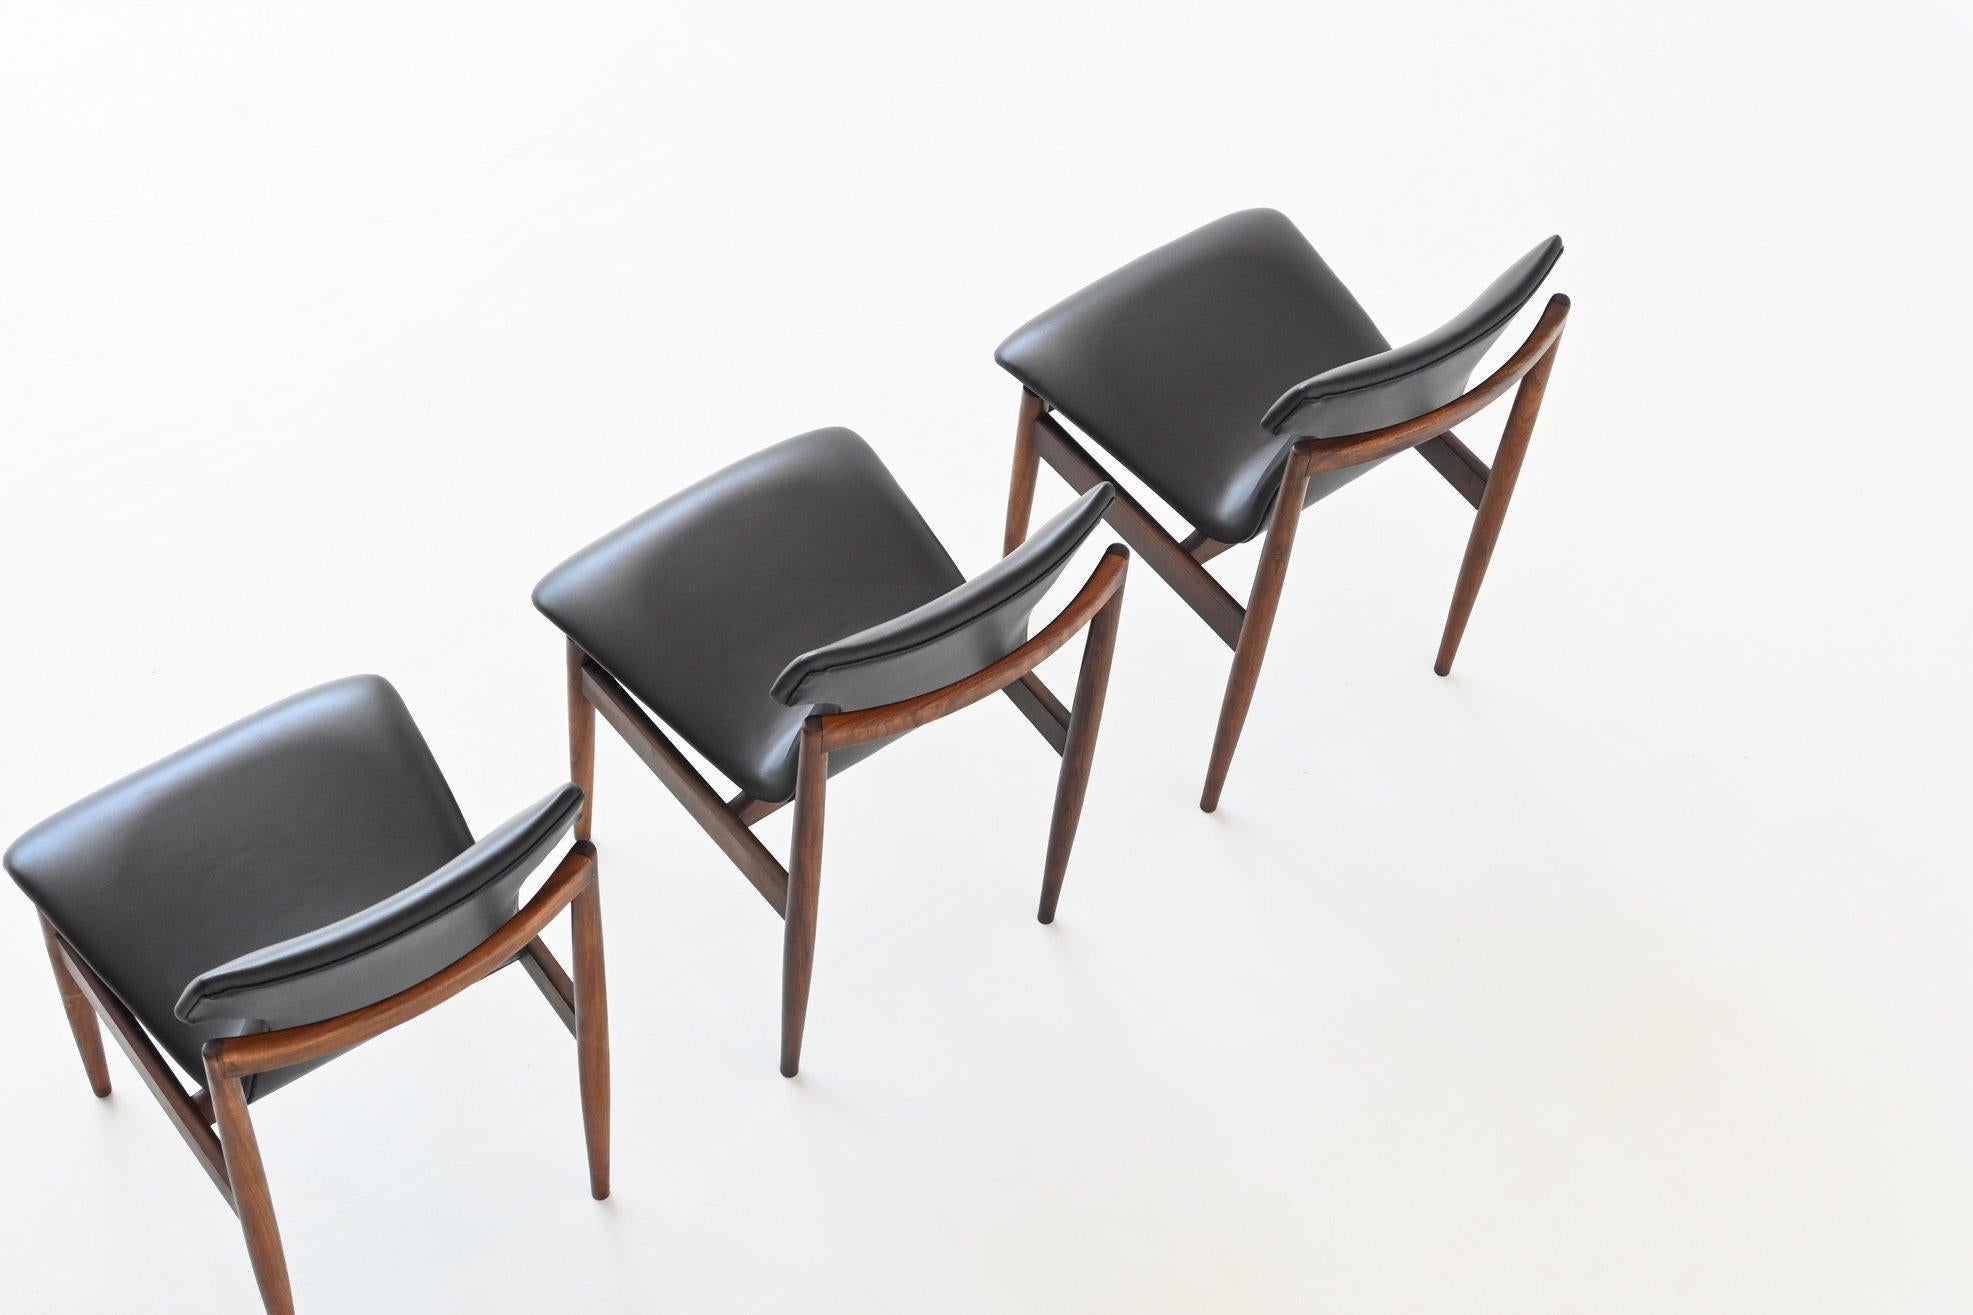 Faux Leather Inger Klingenberg Rosewood Dining Chairs Fristho, the Netherlands, 1960